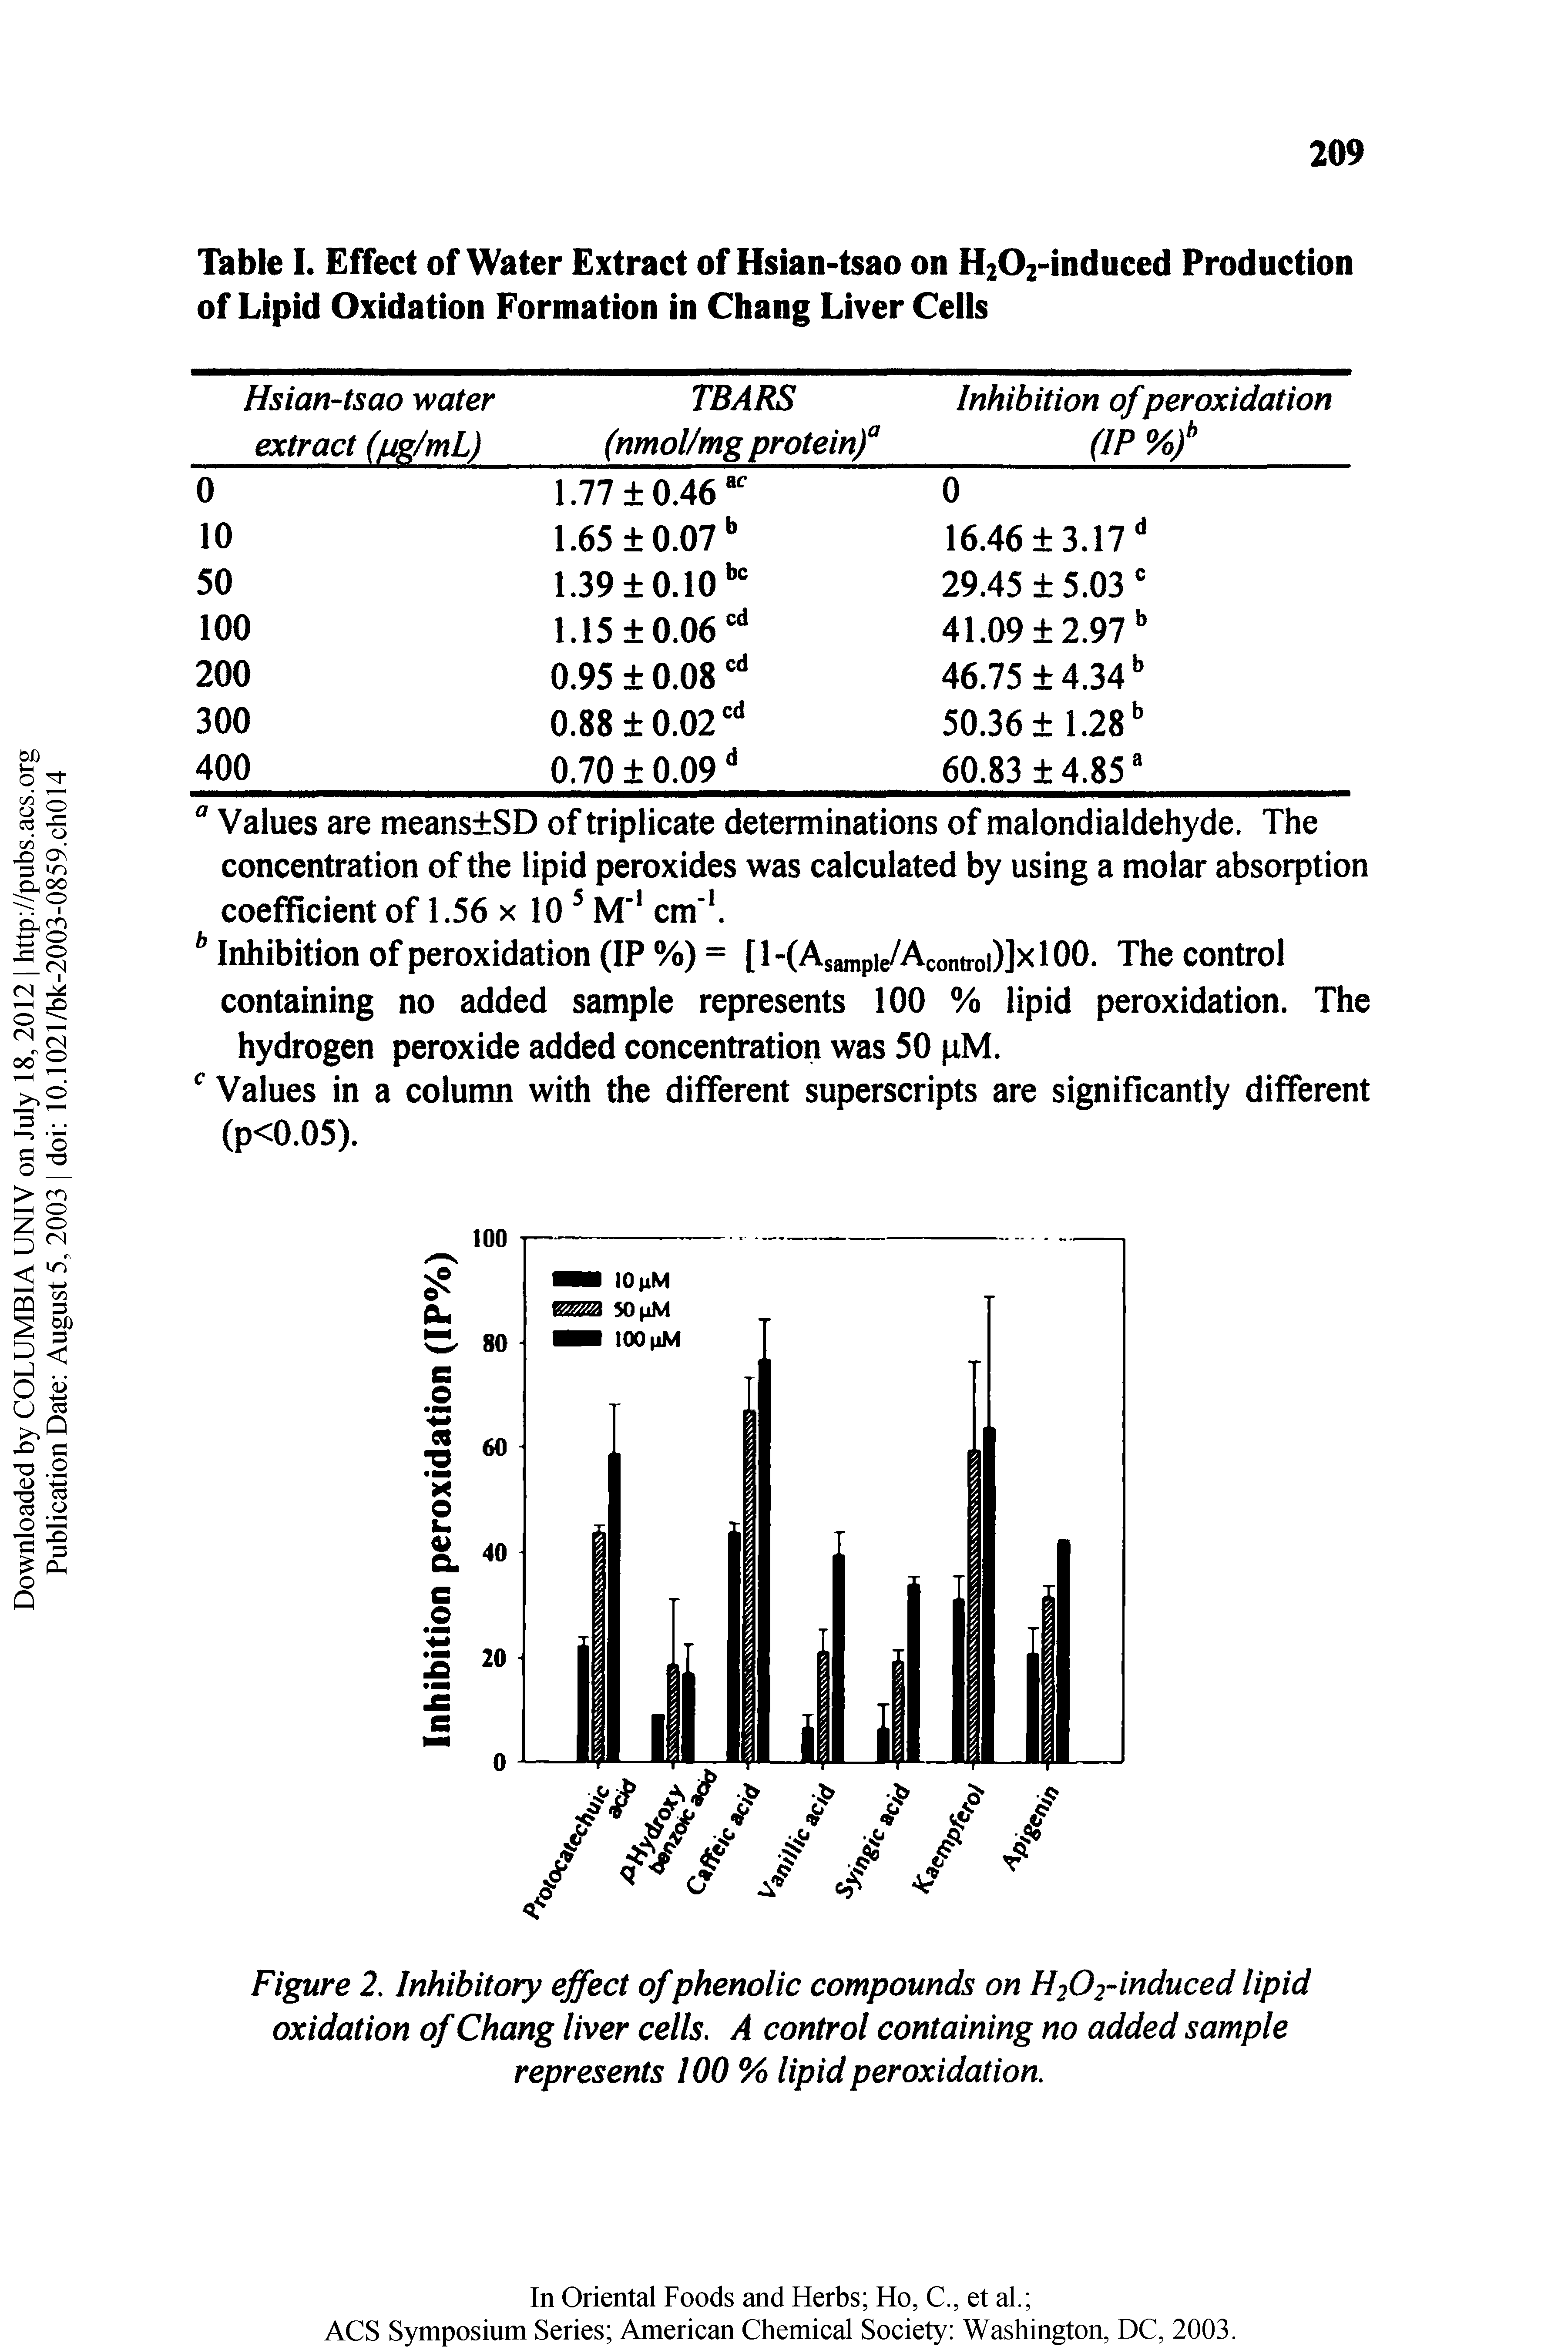 Figure 2. Inhibitory effect of phenolic compounds on H20rinduced lipid oxidation of Chang liver cells. A control containing no added sample represents 100 % lipid peroxidation.